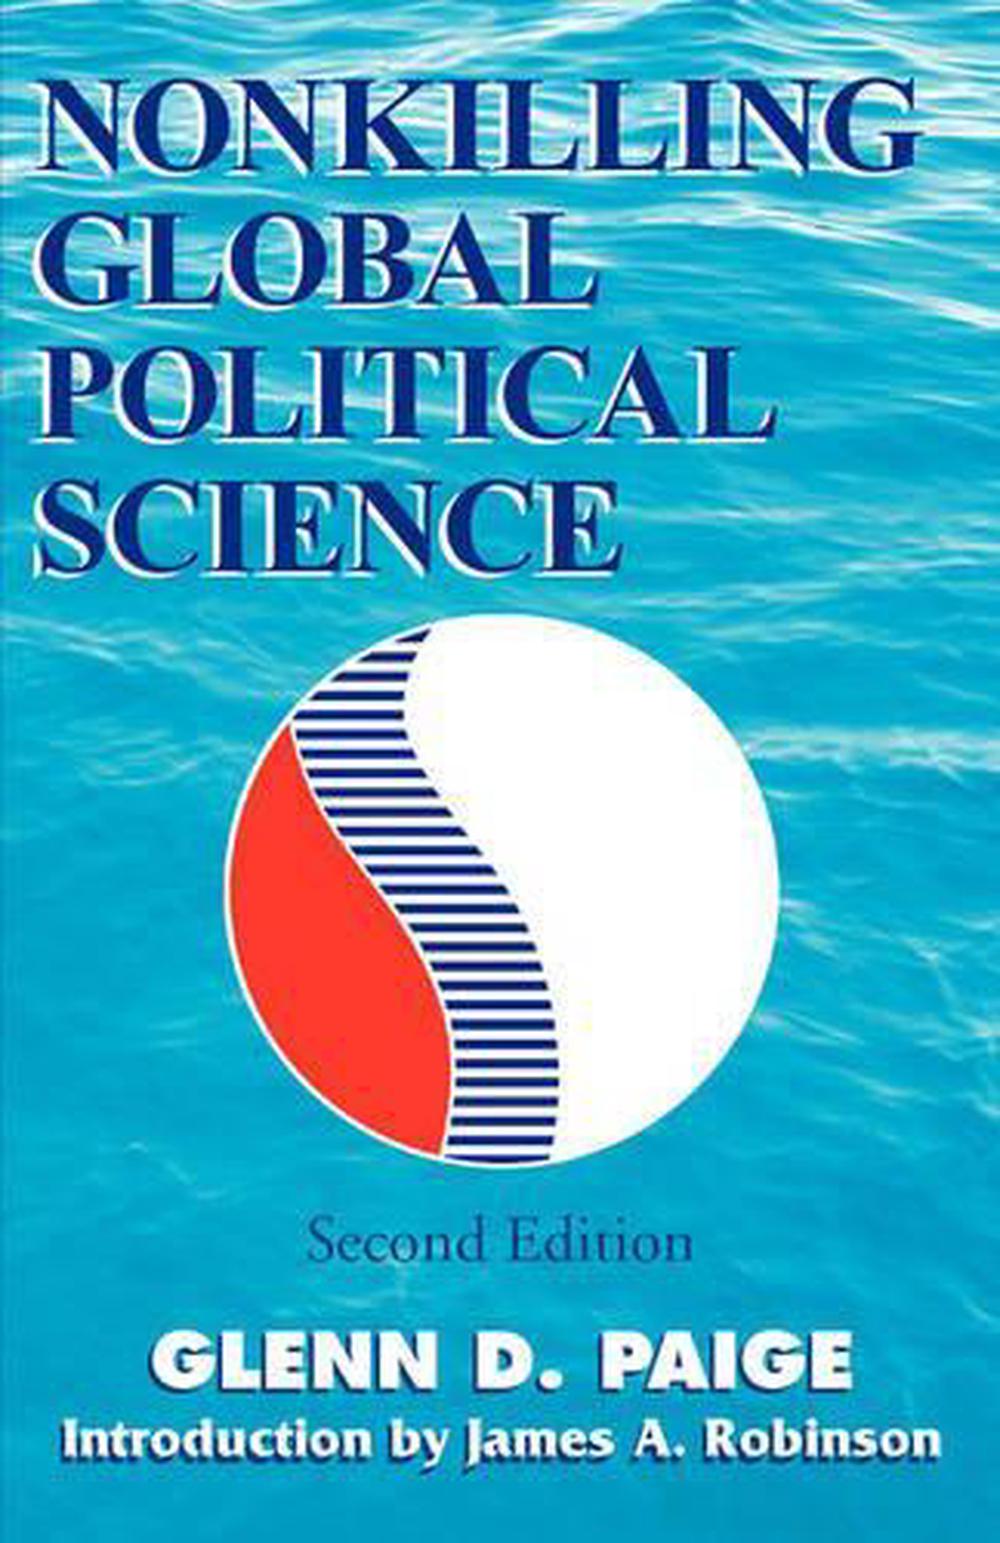 Nonkilling Global Political Science by Glenn D. Paige (English